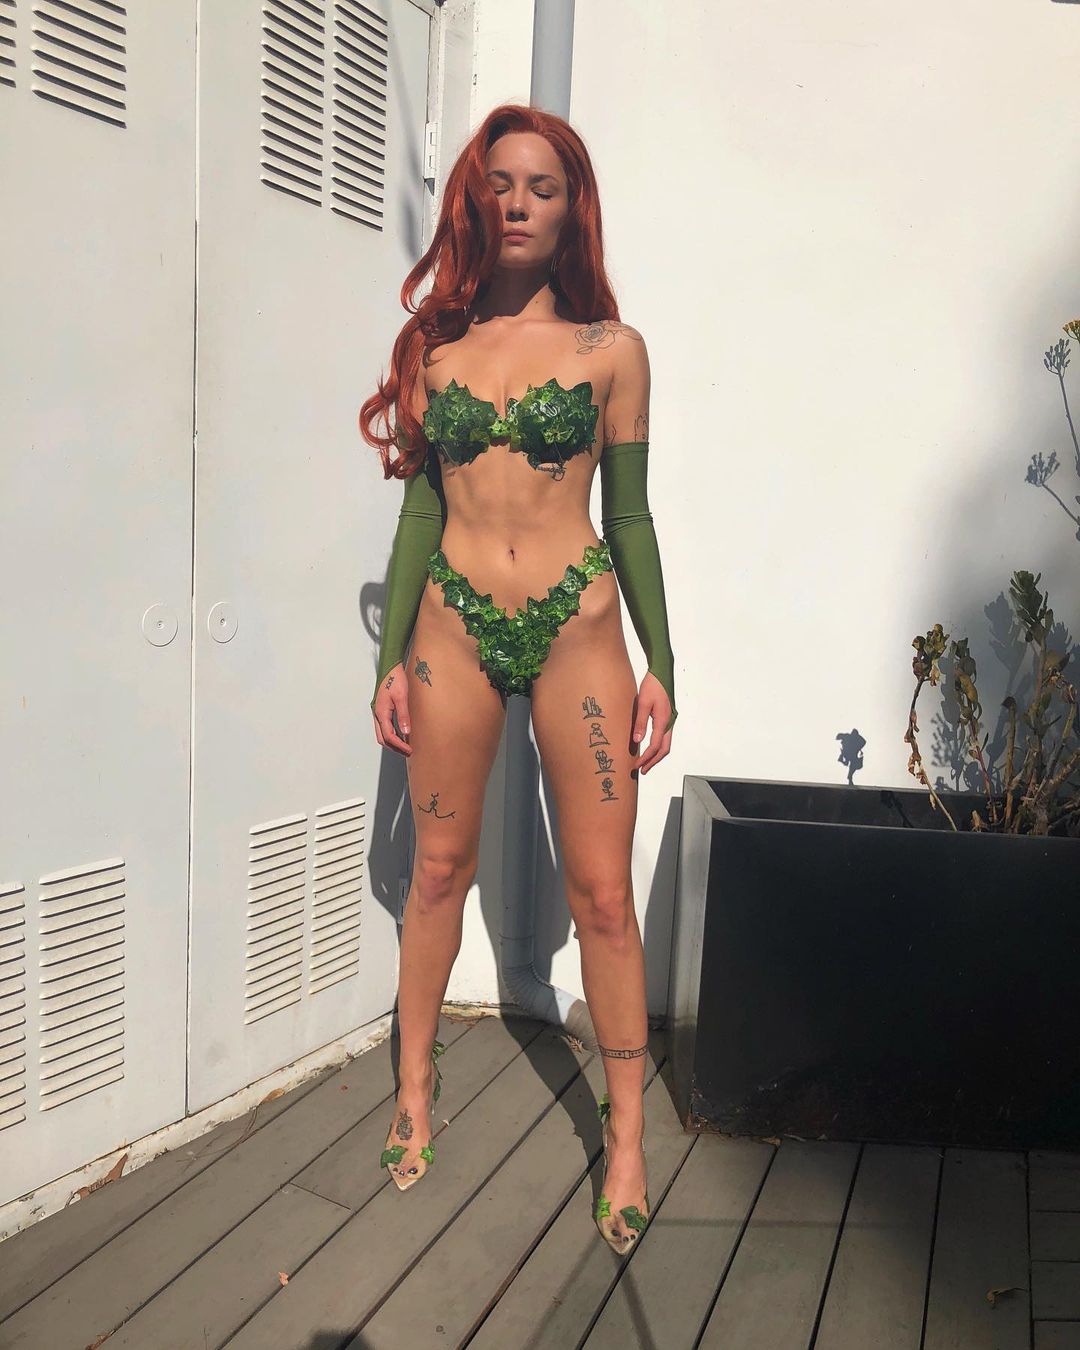 Photos n°1 : Who Did Poison Ivy Better – Bebe Rehxa or Bella Hadid?